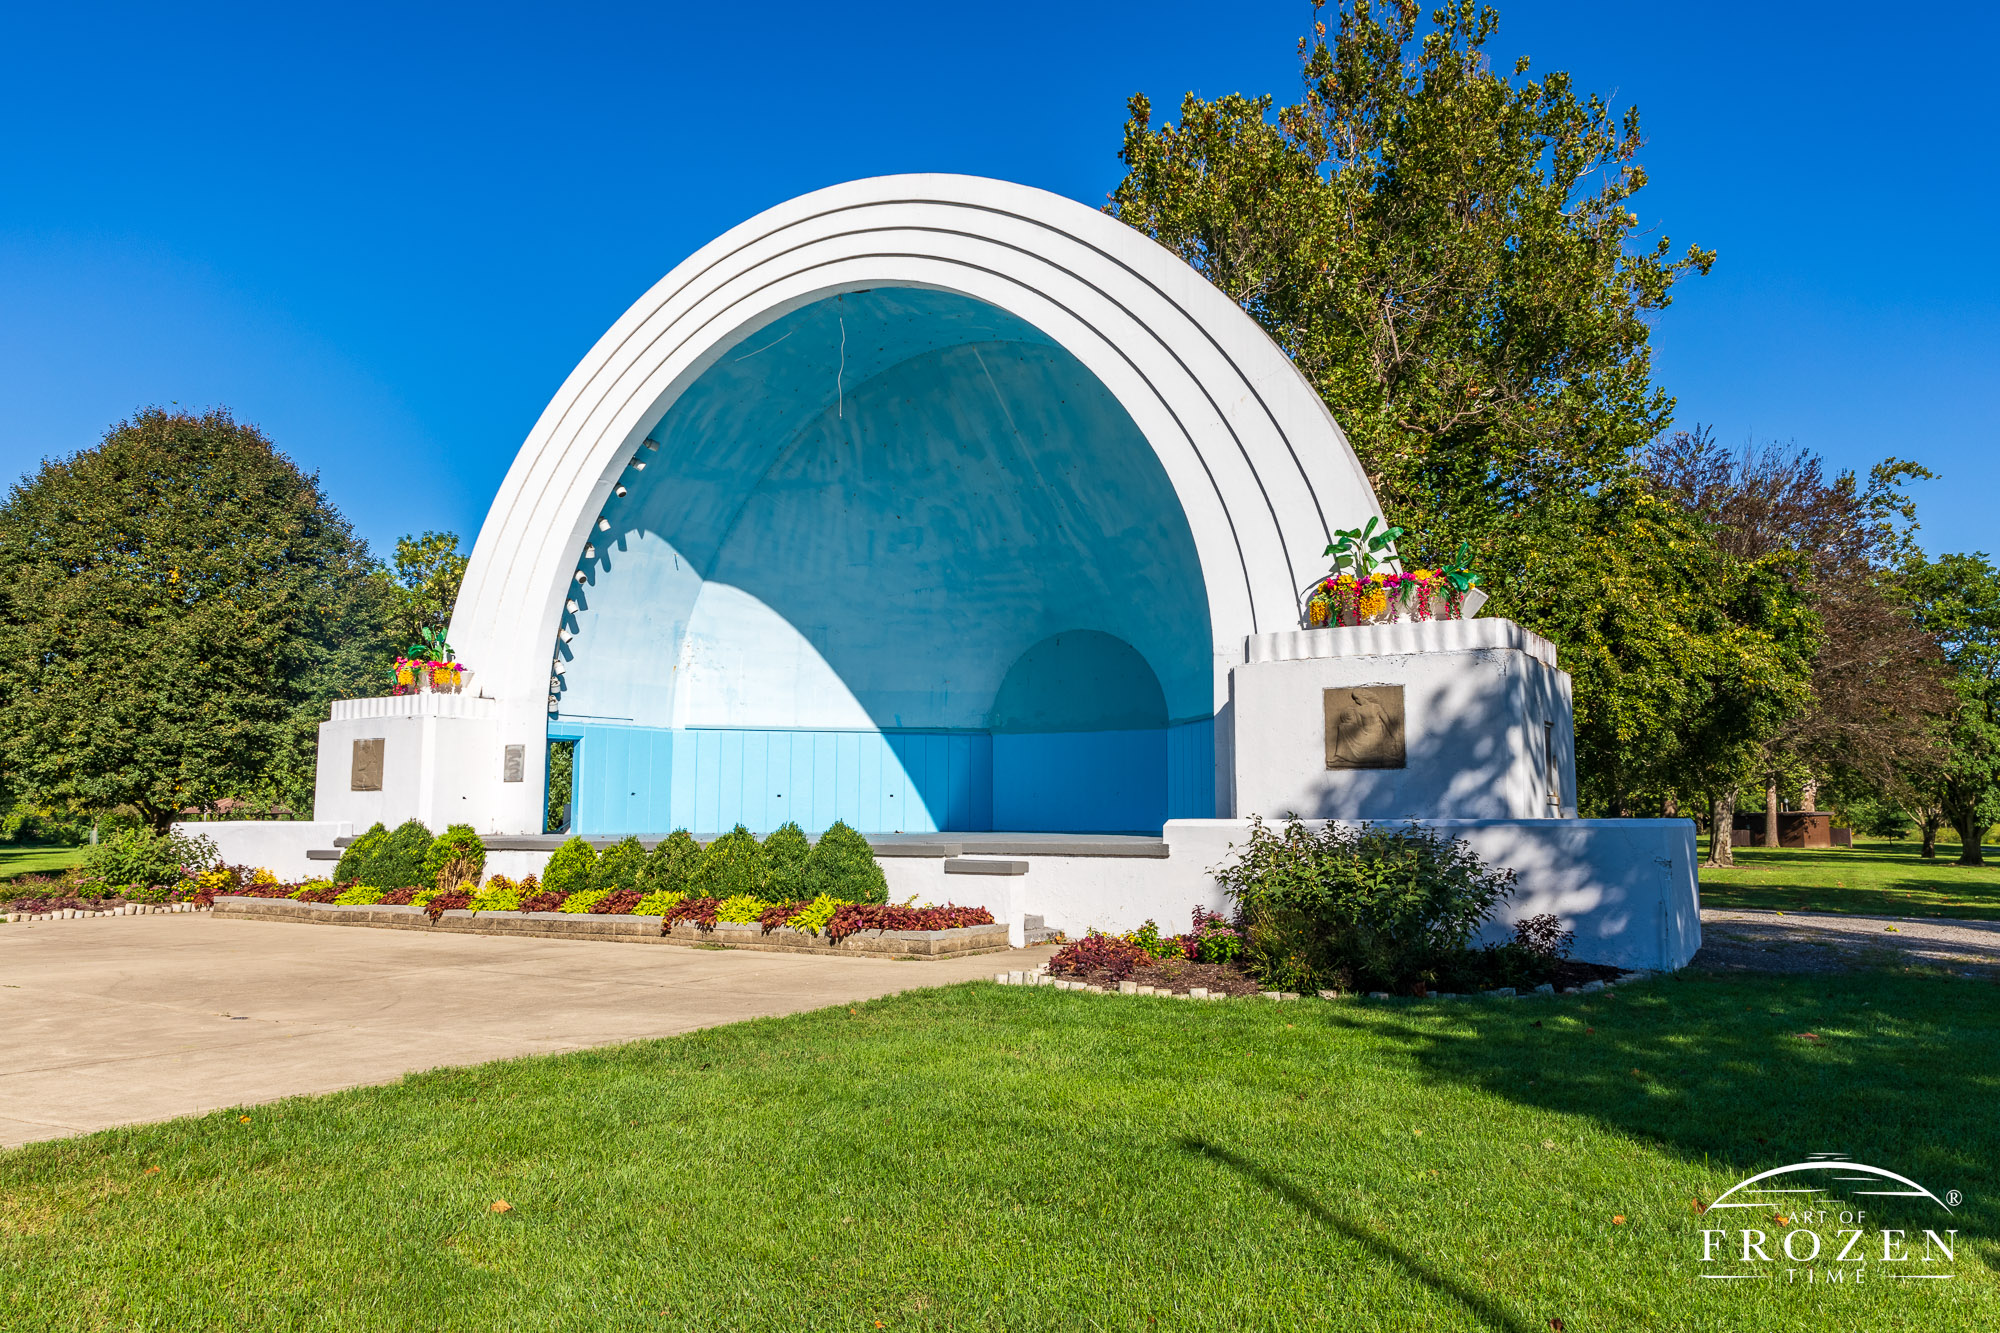 Dayton Ohio’s historical band shell stands proudly in Island MetroPark on this pretty day over the Miami Valley